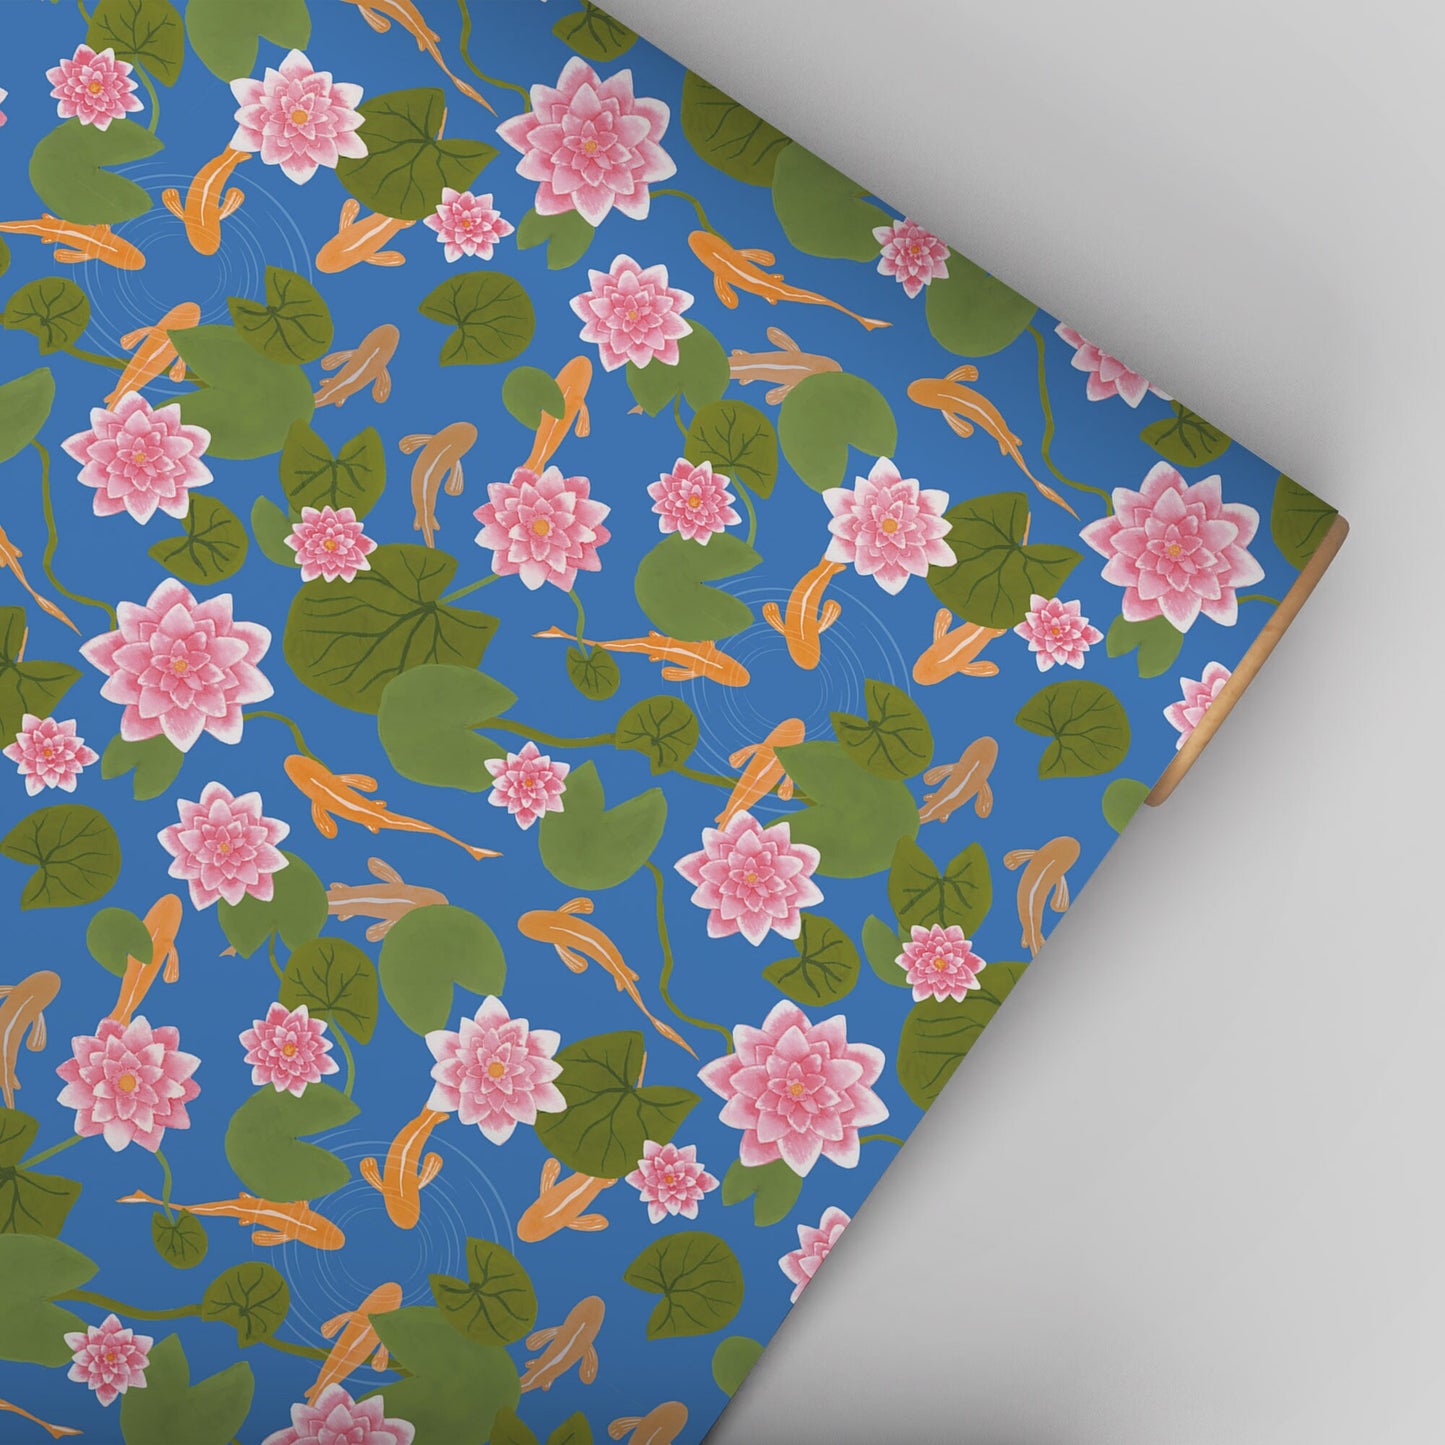 Wrapping paper 'Waterlily' 50x70cm with water lilies and goldfish